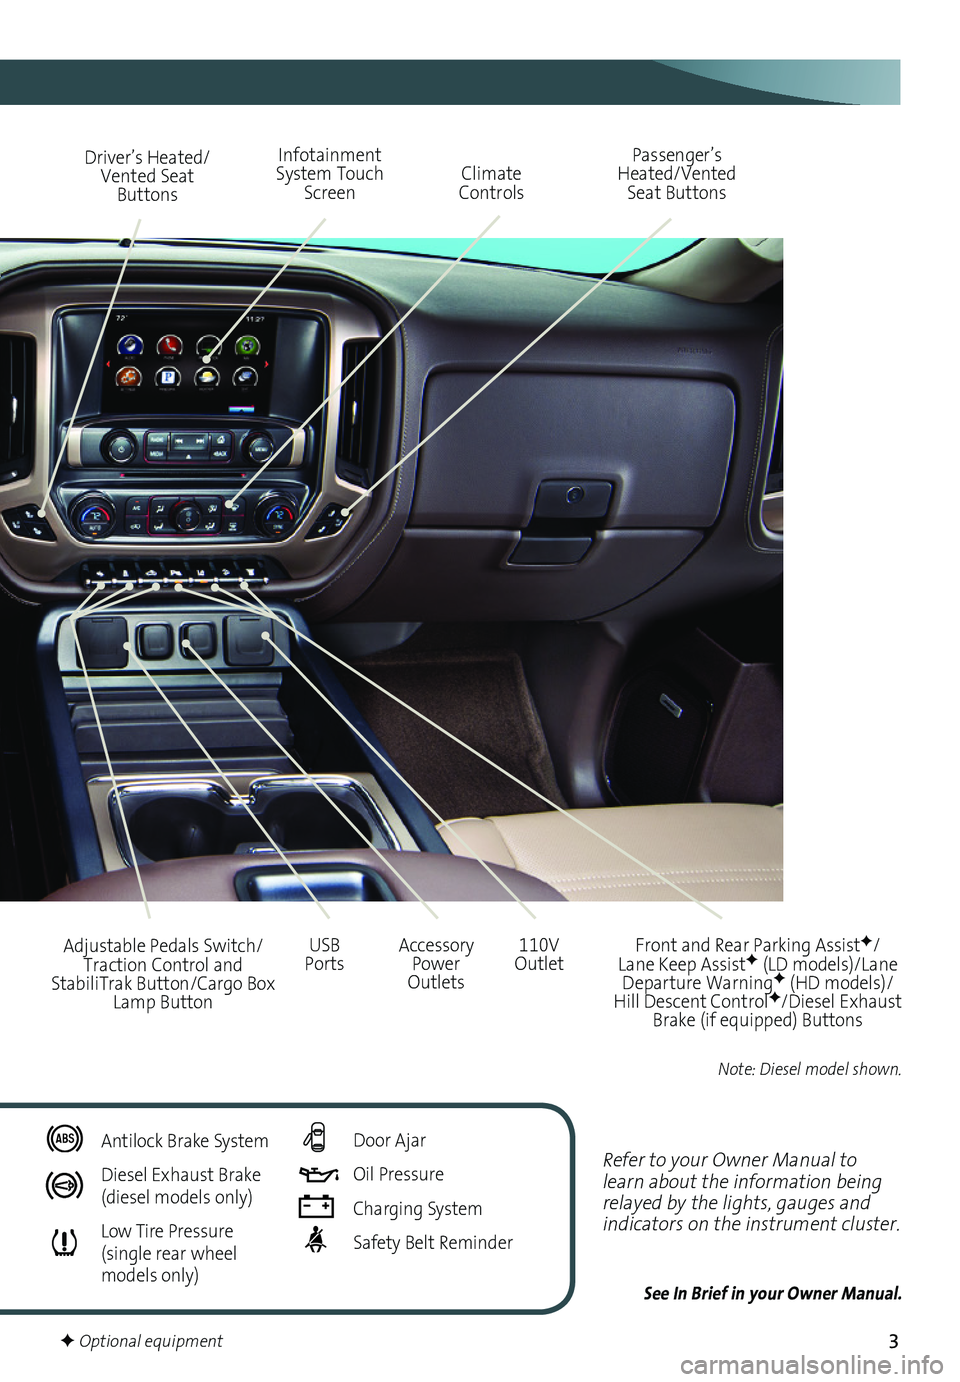 GMC SIERRA 2016  Get To Know Guide 3
Refer to your Owner Manual to learn about the information being relayed by the lights, gauges and indicators on the instrument cluster.
See In Brief in your Owner Manual.
Driver’s Heated/Vented Se